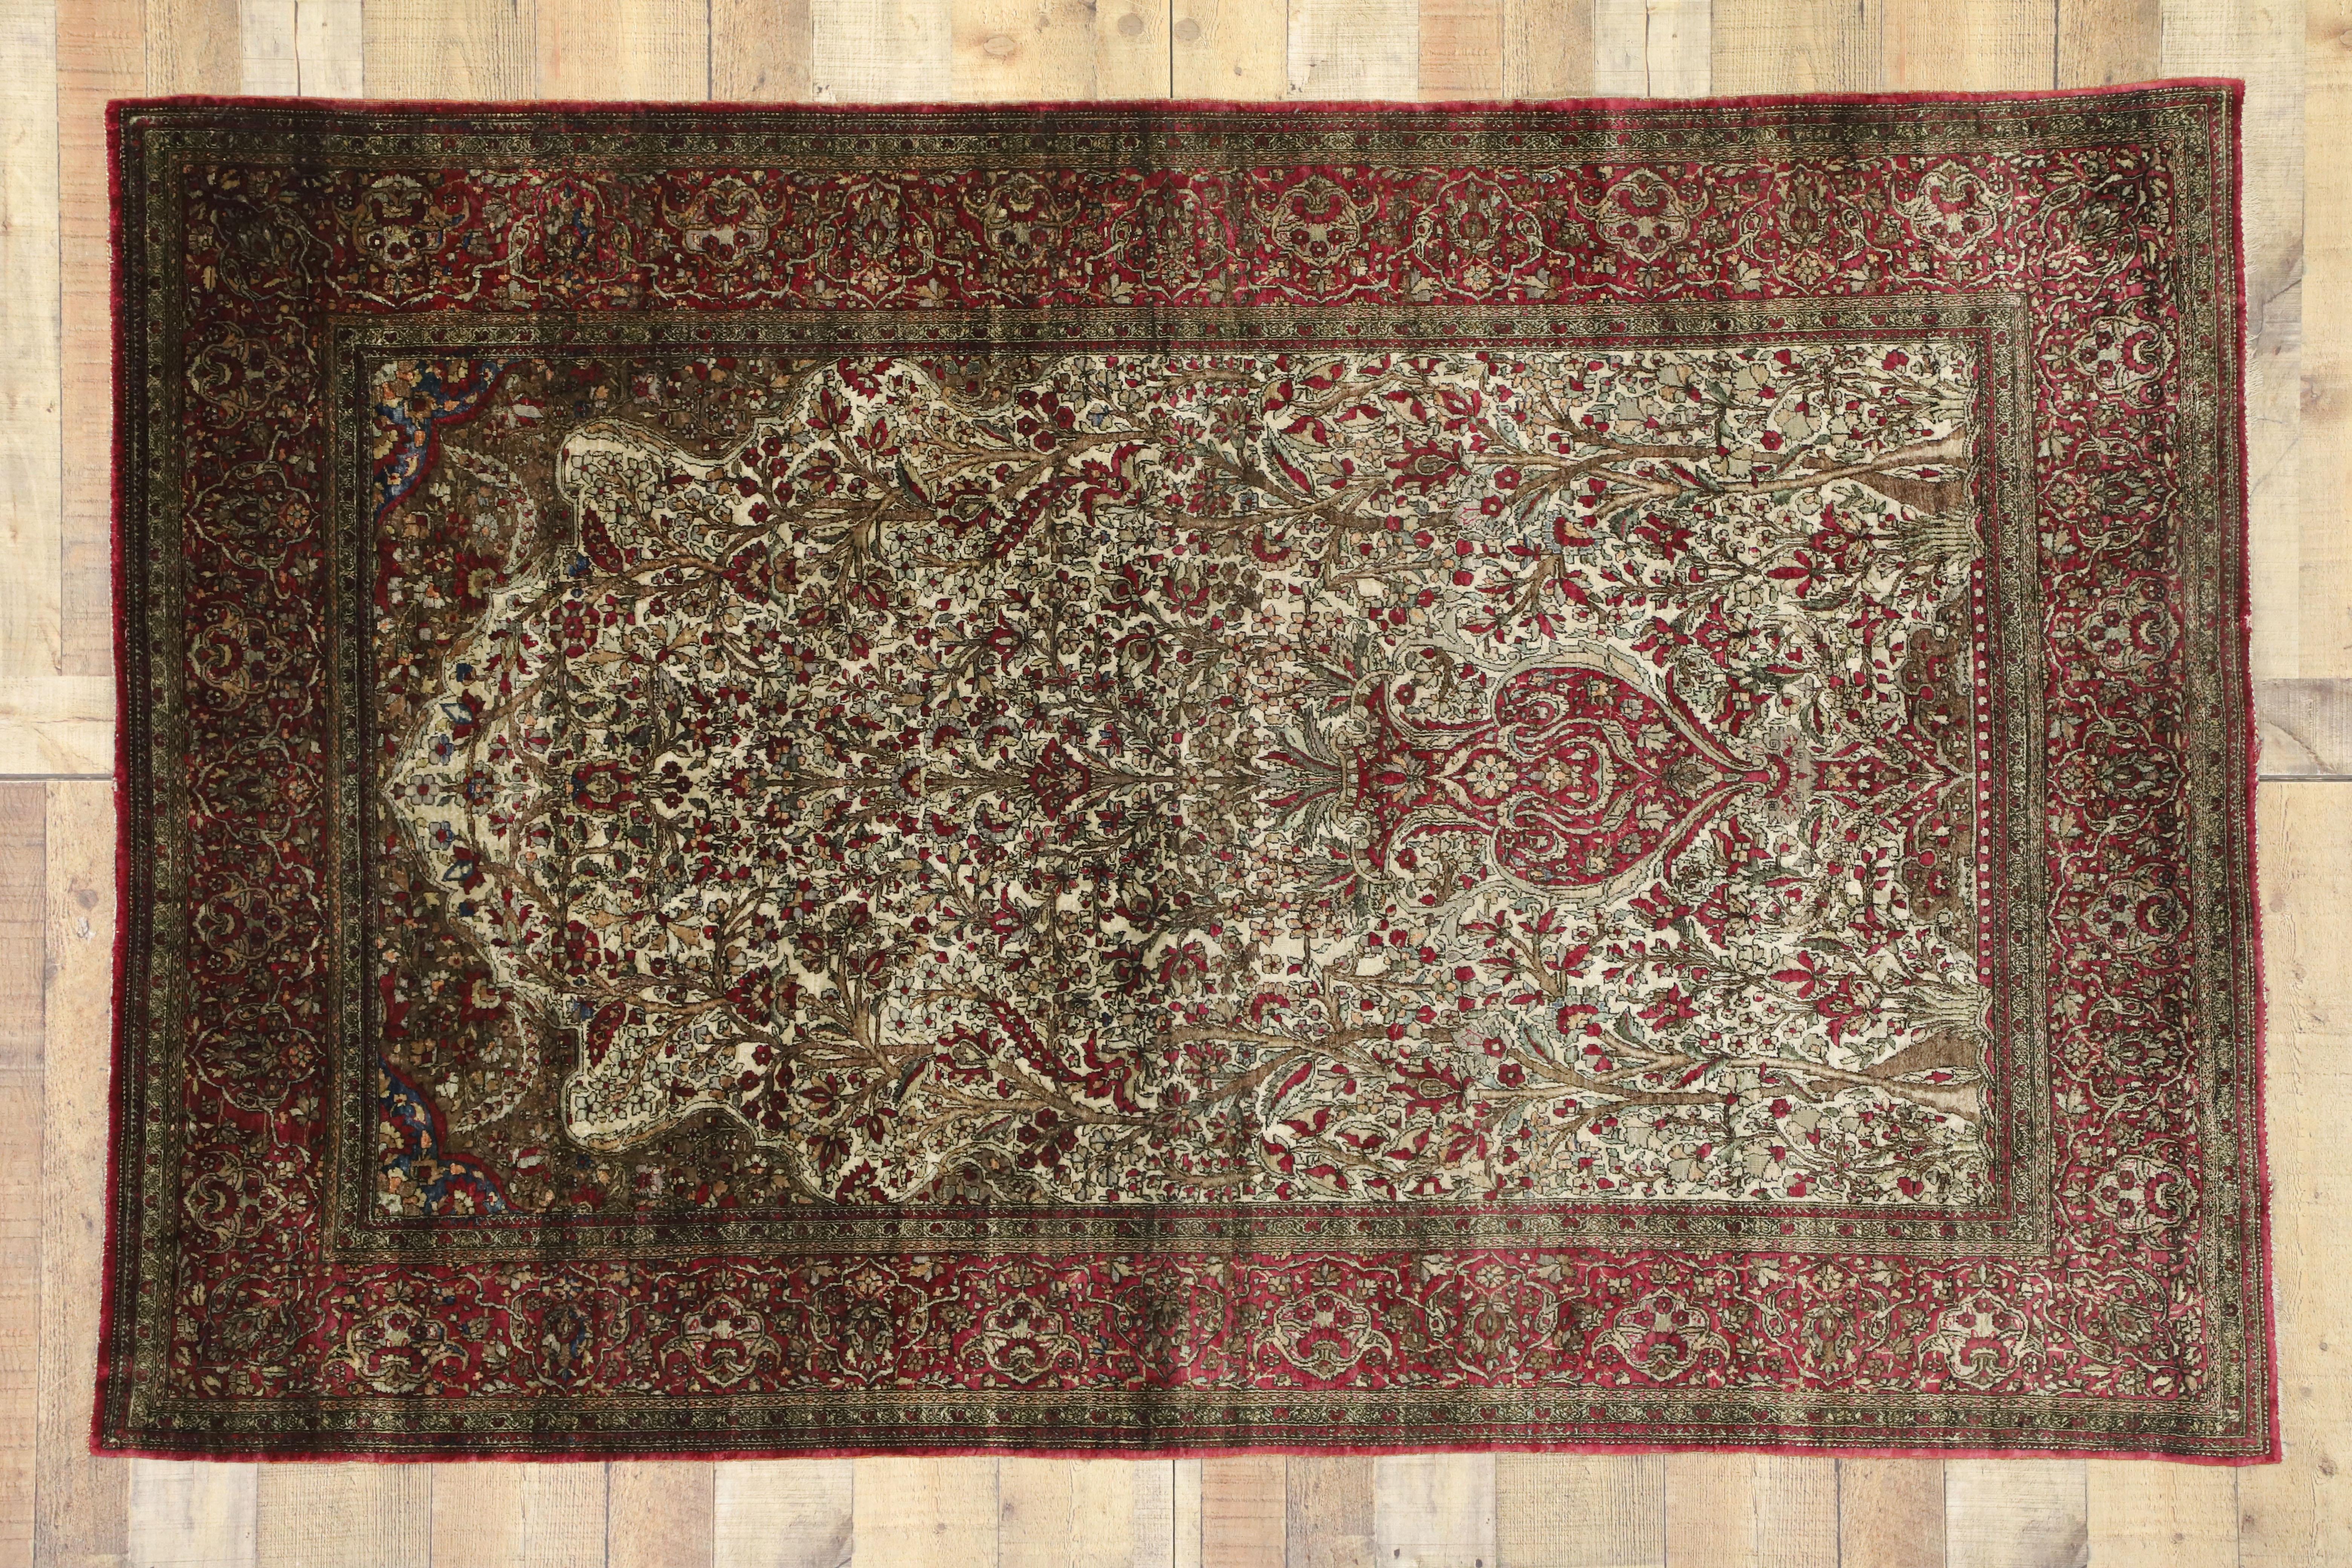 20th Century Antique Persian Silk Kashan Prayer Rug with Empire Regency Style For Sale